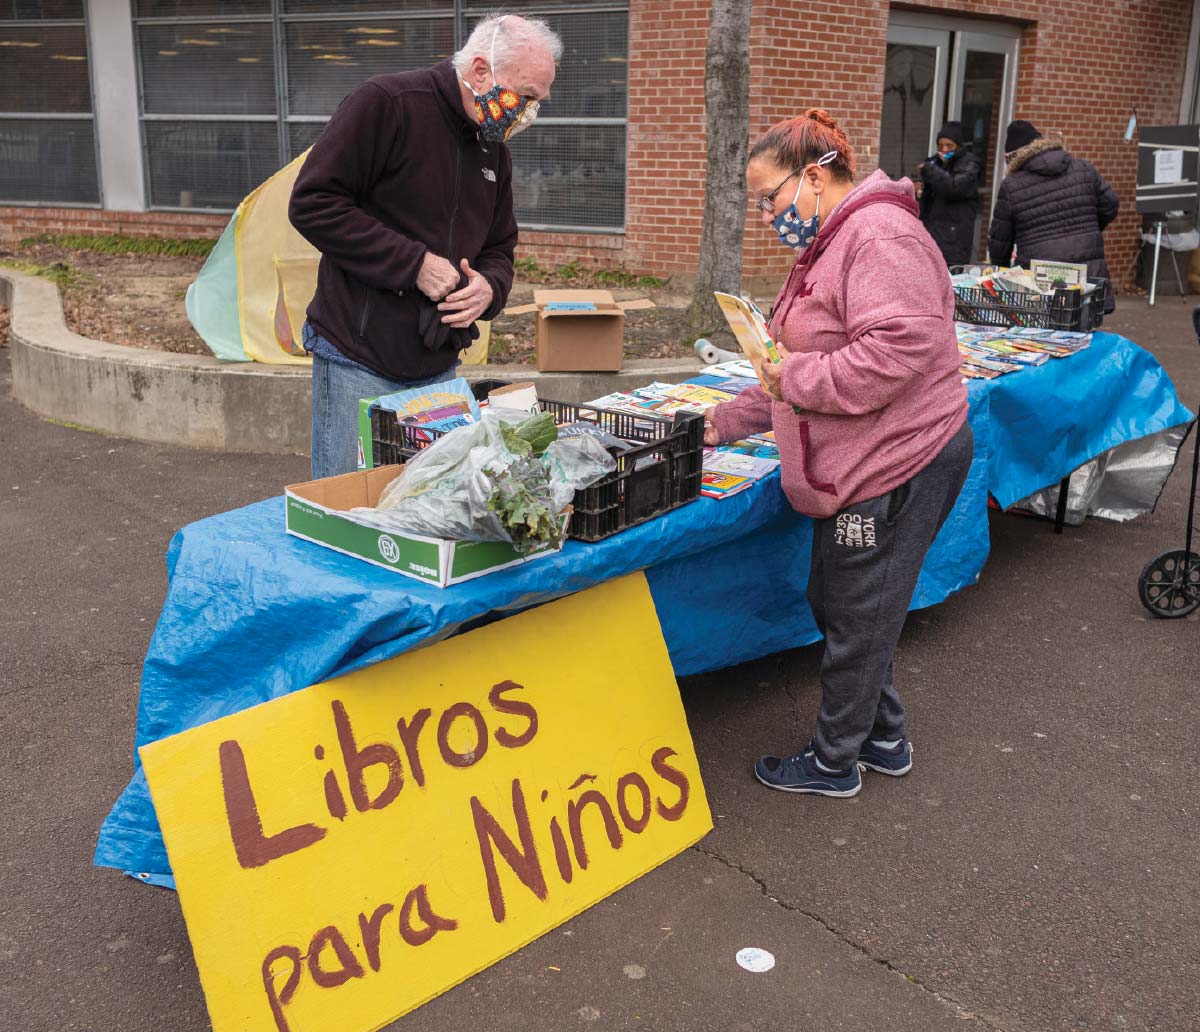 Peter Warrington, wearing a black jacket and a facemask, looking down at a table of books and vegetables. A woman dressed in a pink jacket, gray sweatpants, and a facemask, stands on the other side of the table holding a few books. A yellow sign next to the table reads “Libros para Niños.”